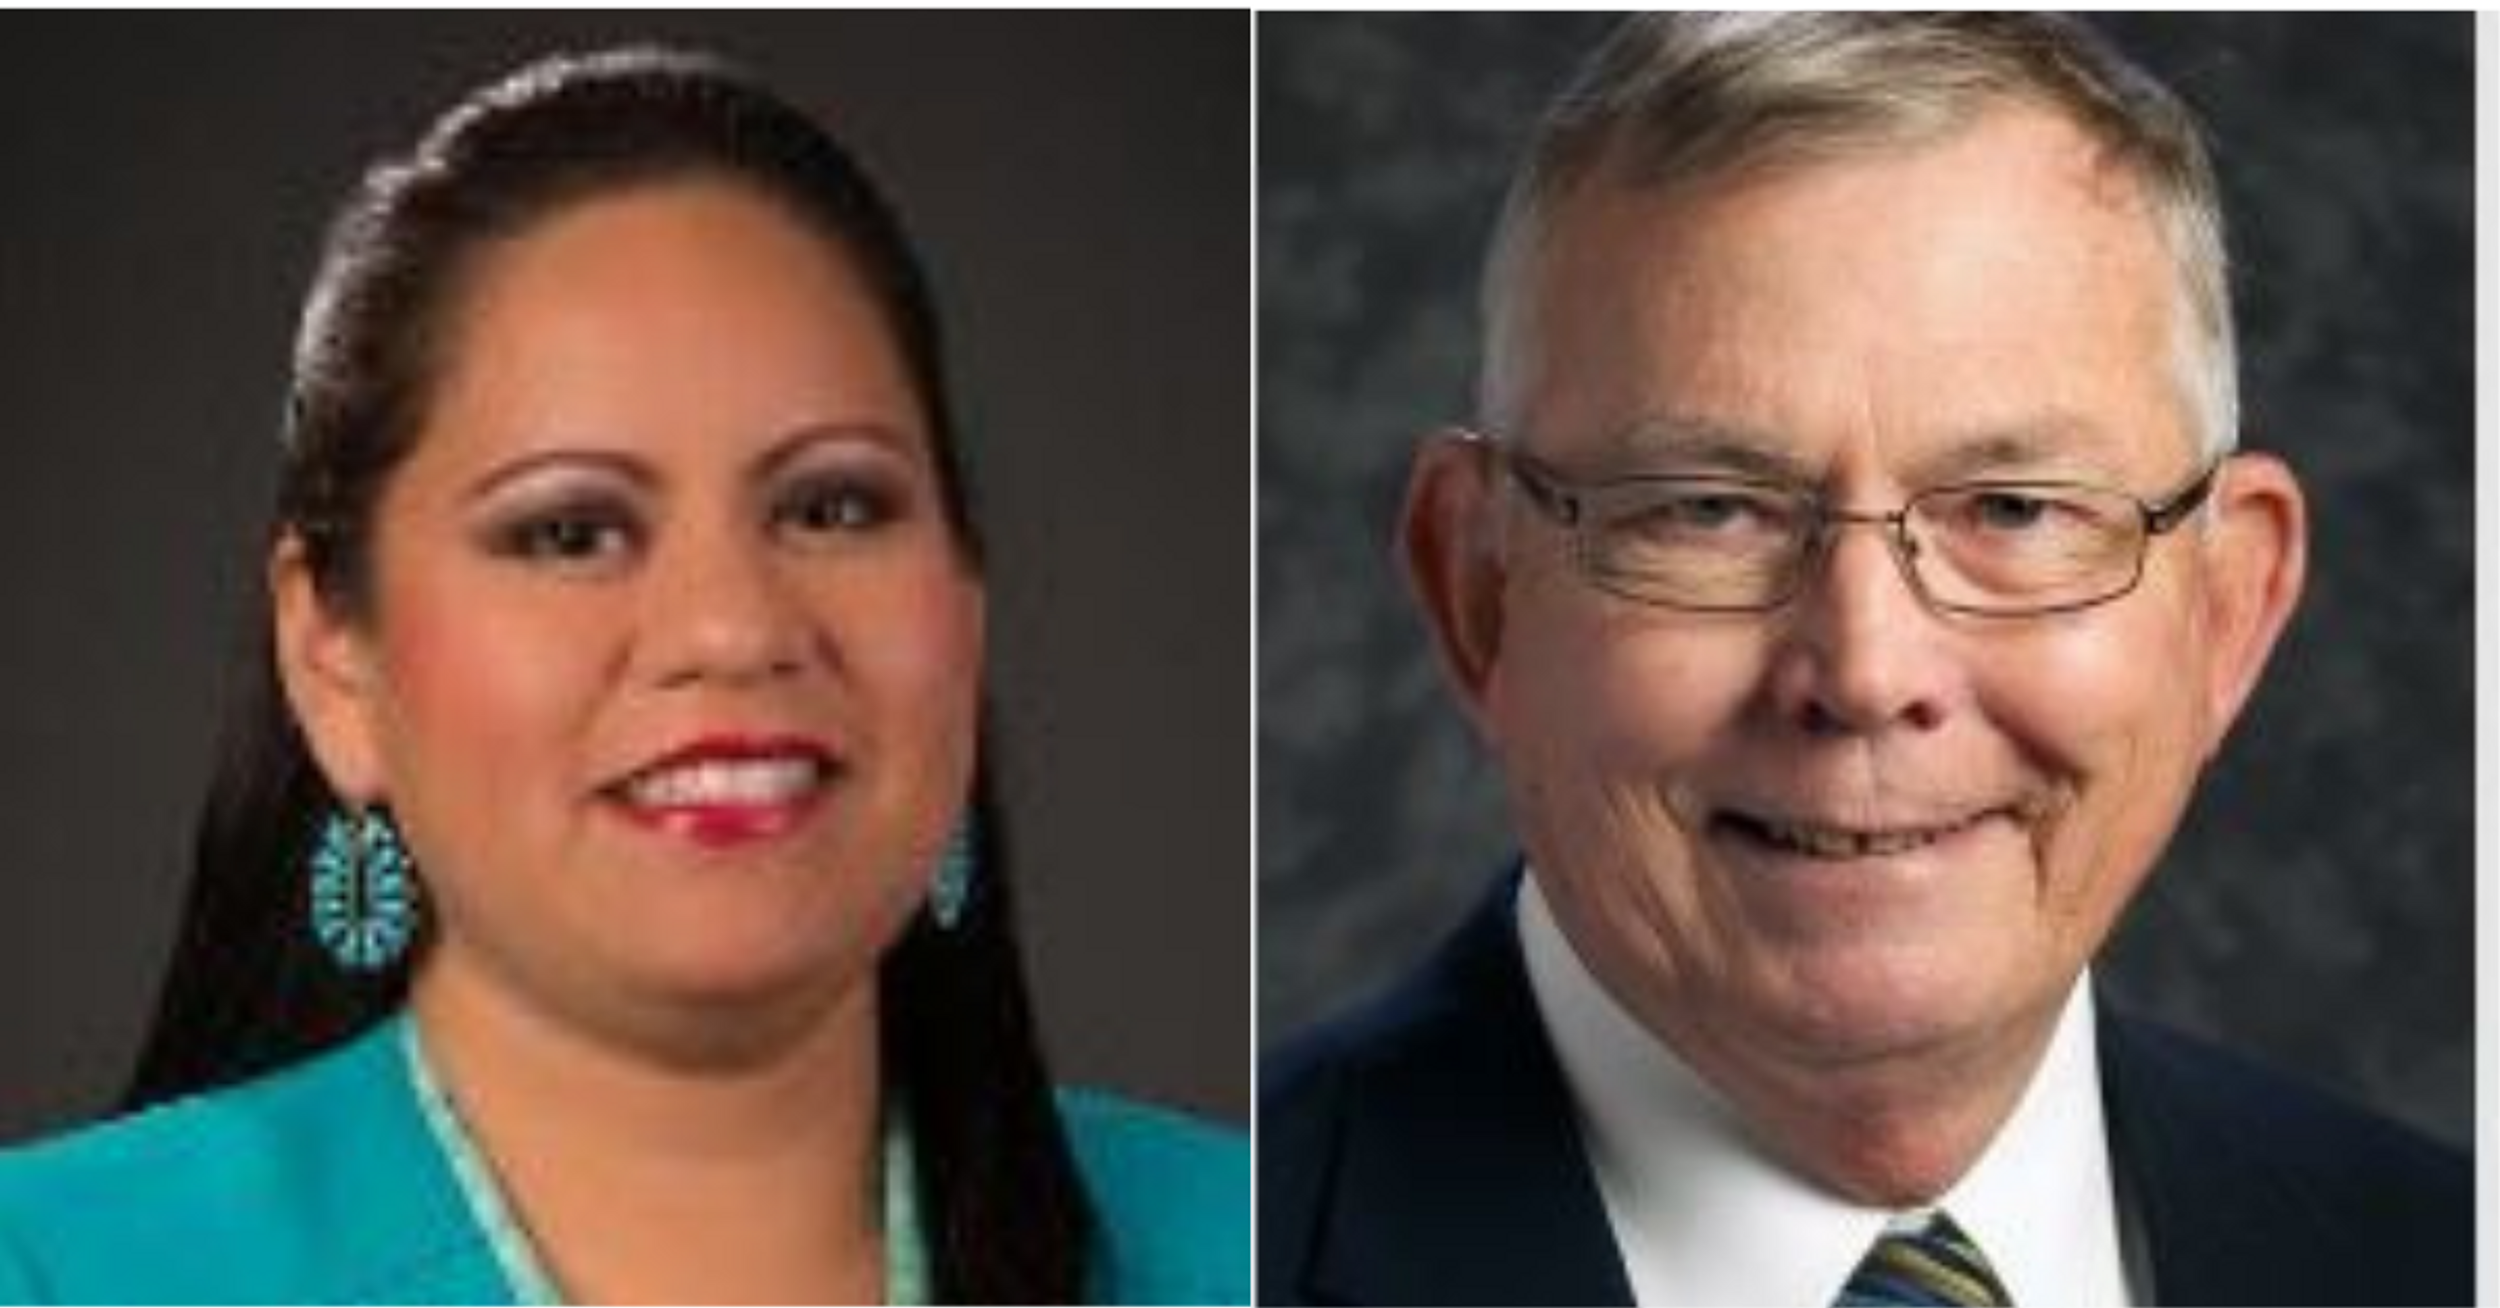 Indigenous State Rep. Rejects GOP Colleague's 'Disingenuous' Apology After Racist Remark